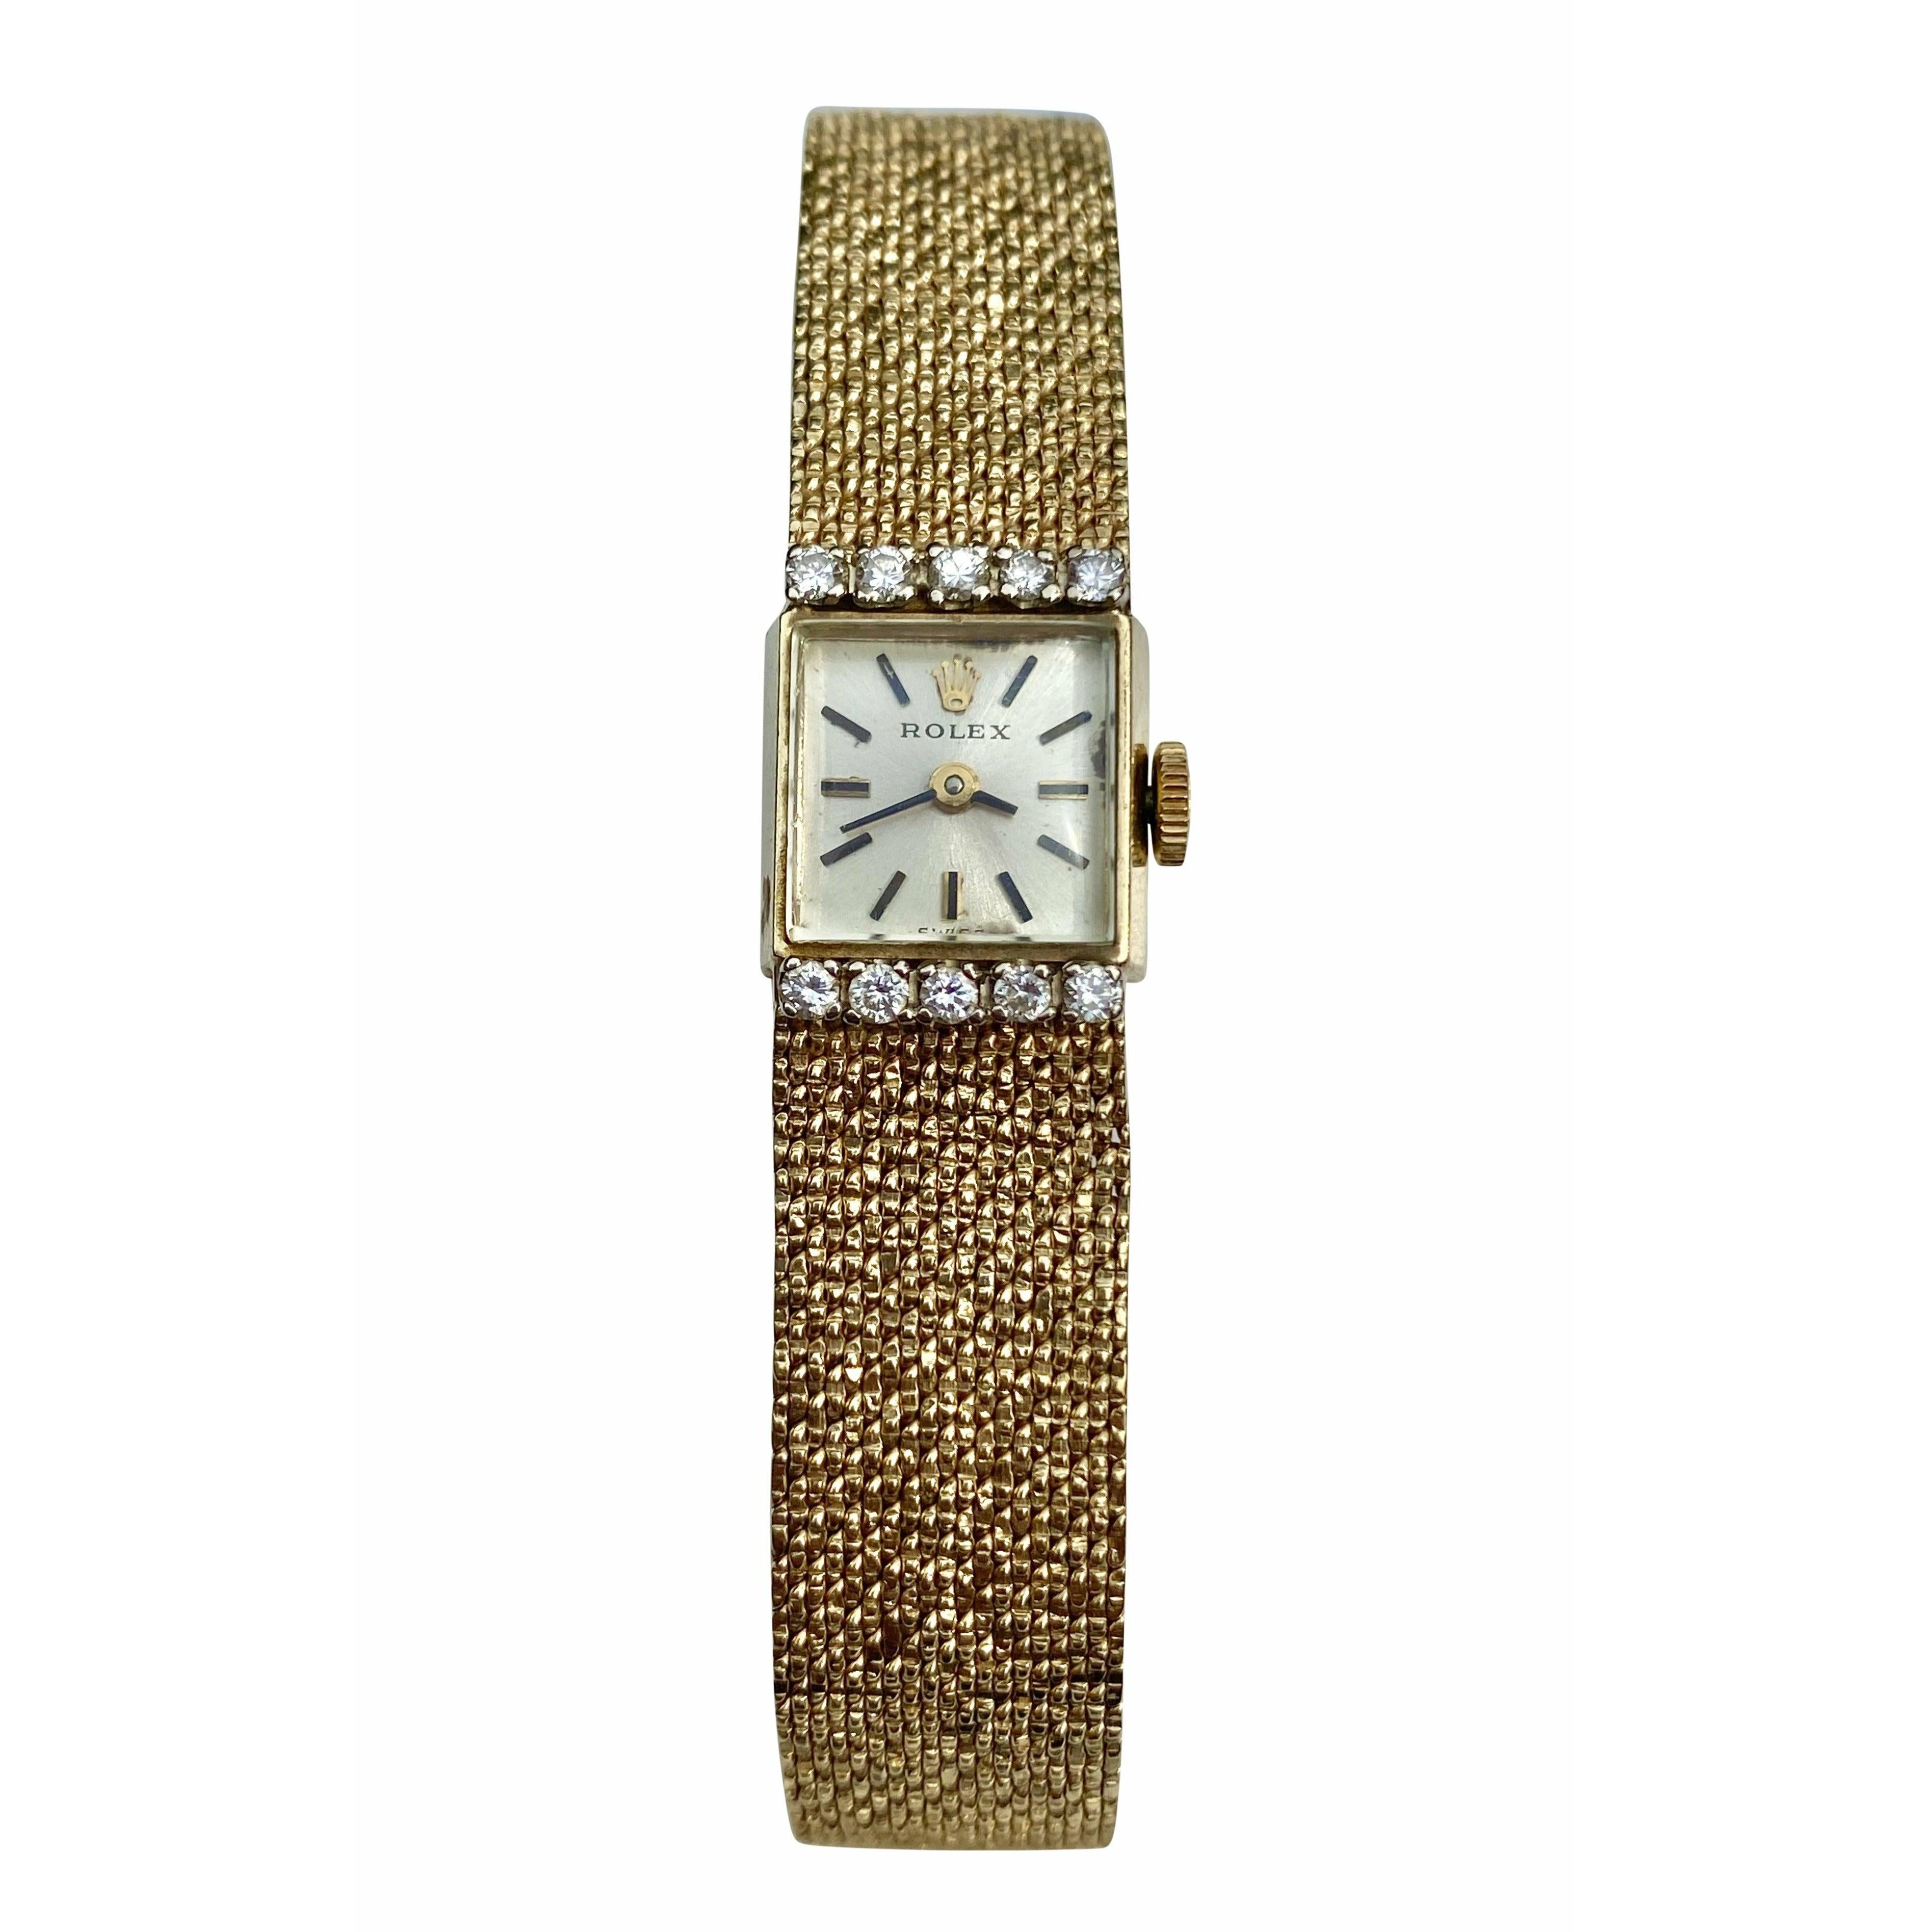 Vintage 1940's Women's Rolex Watch in 14k Gold with Champagne Integral Band-watch-ASSAY